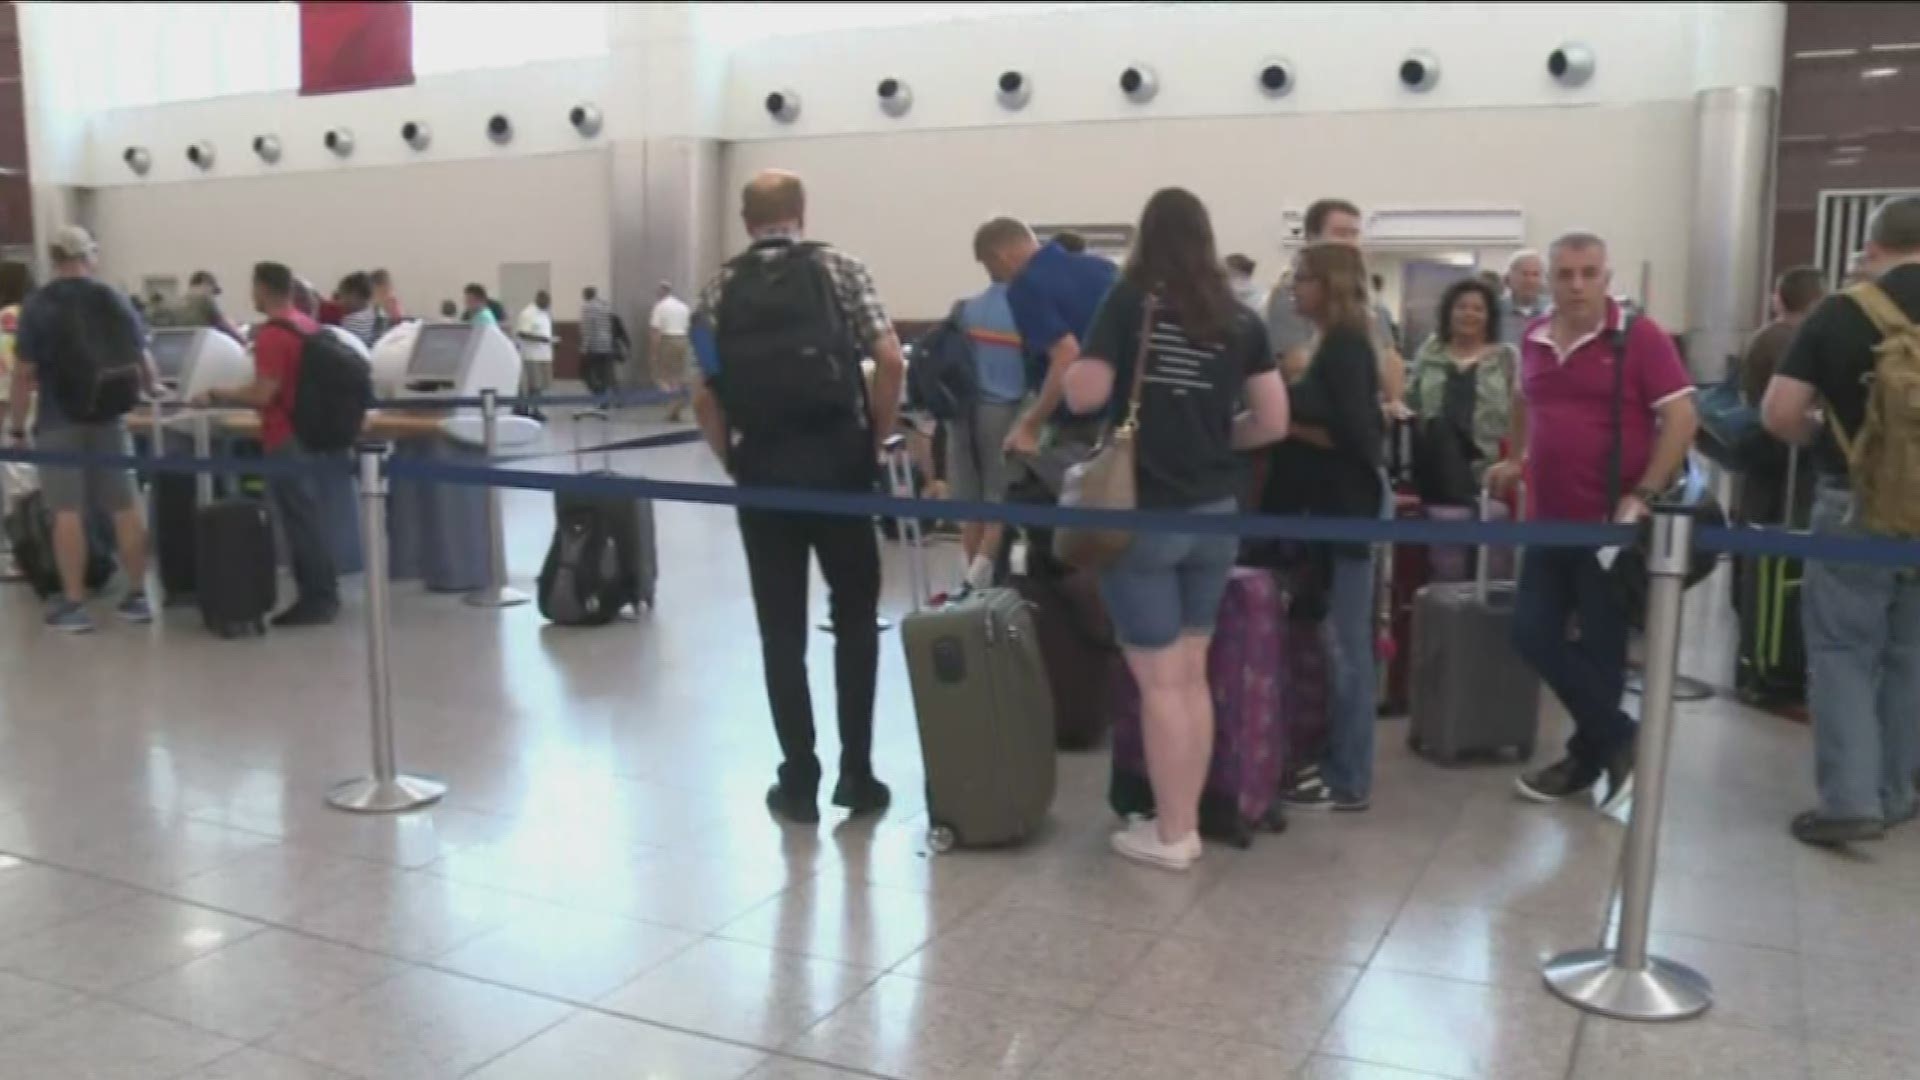 Many airlines have canceled flights going to New Orleans Armstrong International Airport ahead of Tropical Storm Barry. On Saturday morning, many travelers were taking heed of warnings to check with their carriers and made alternative arrangements.